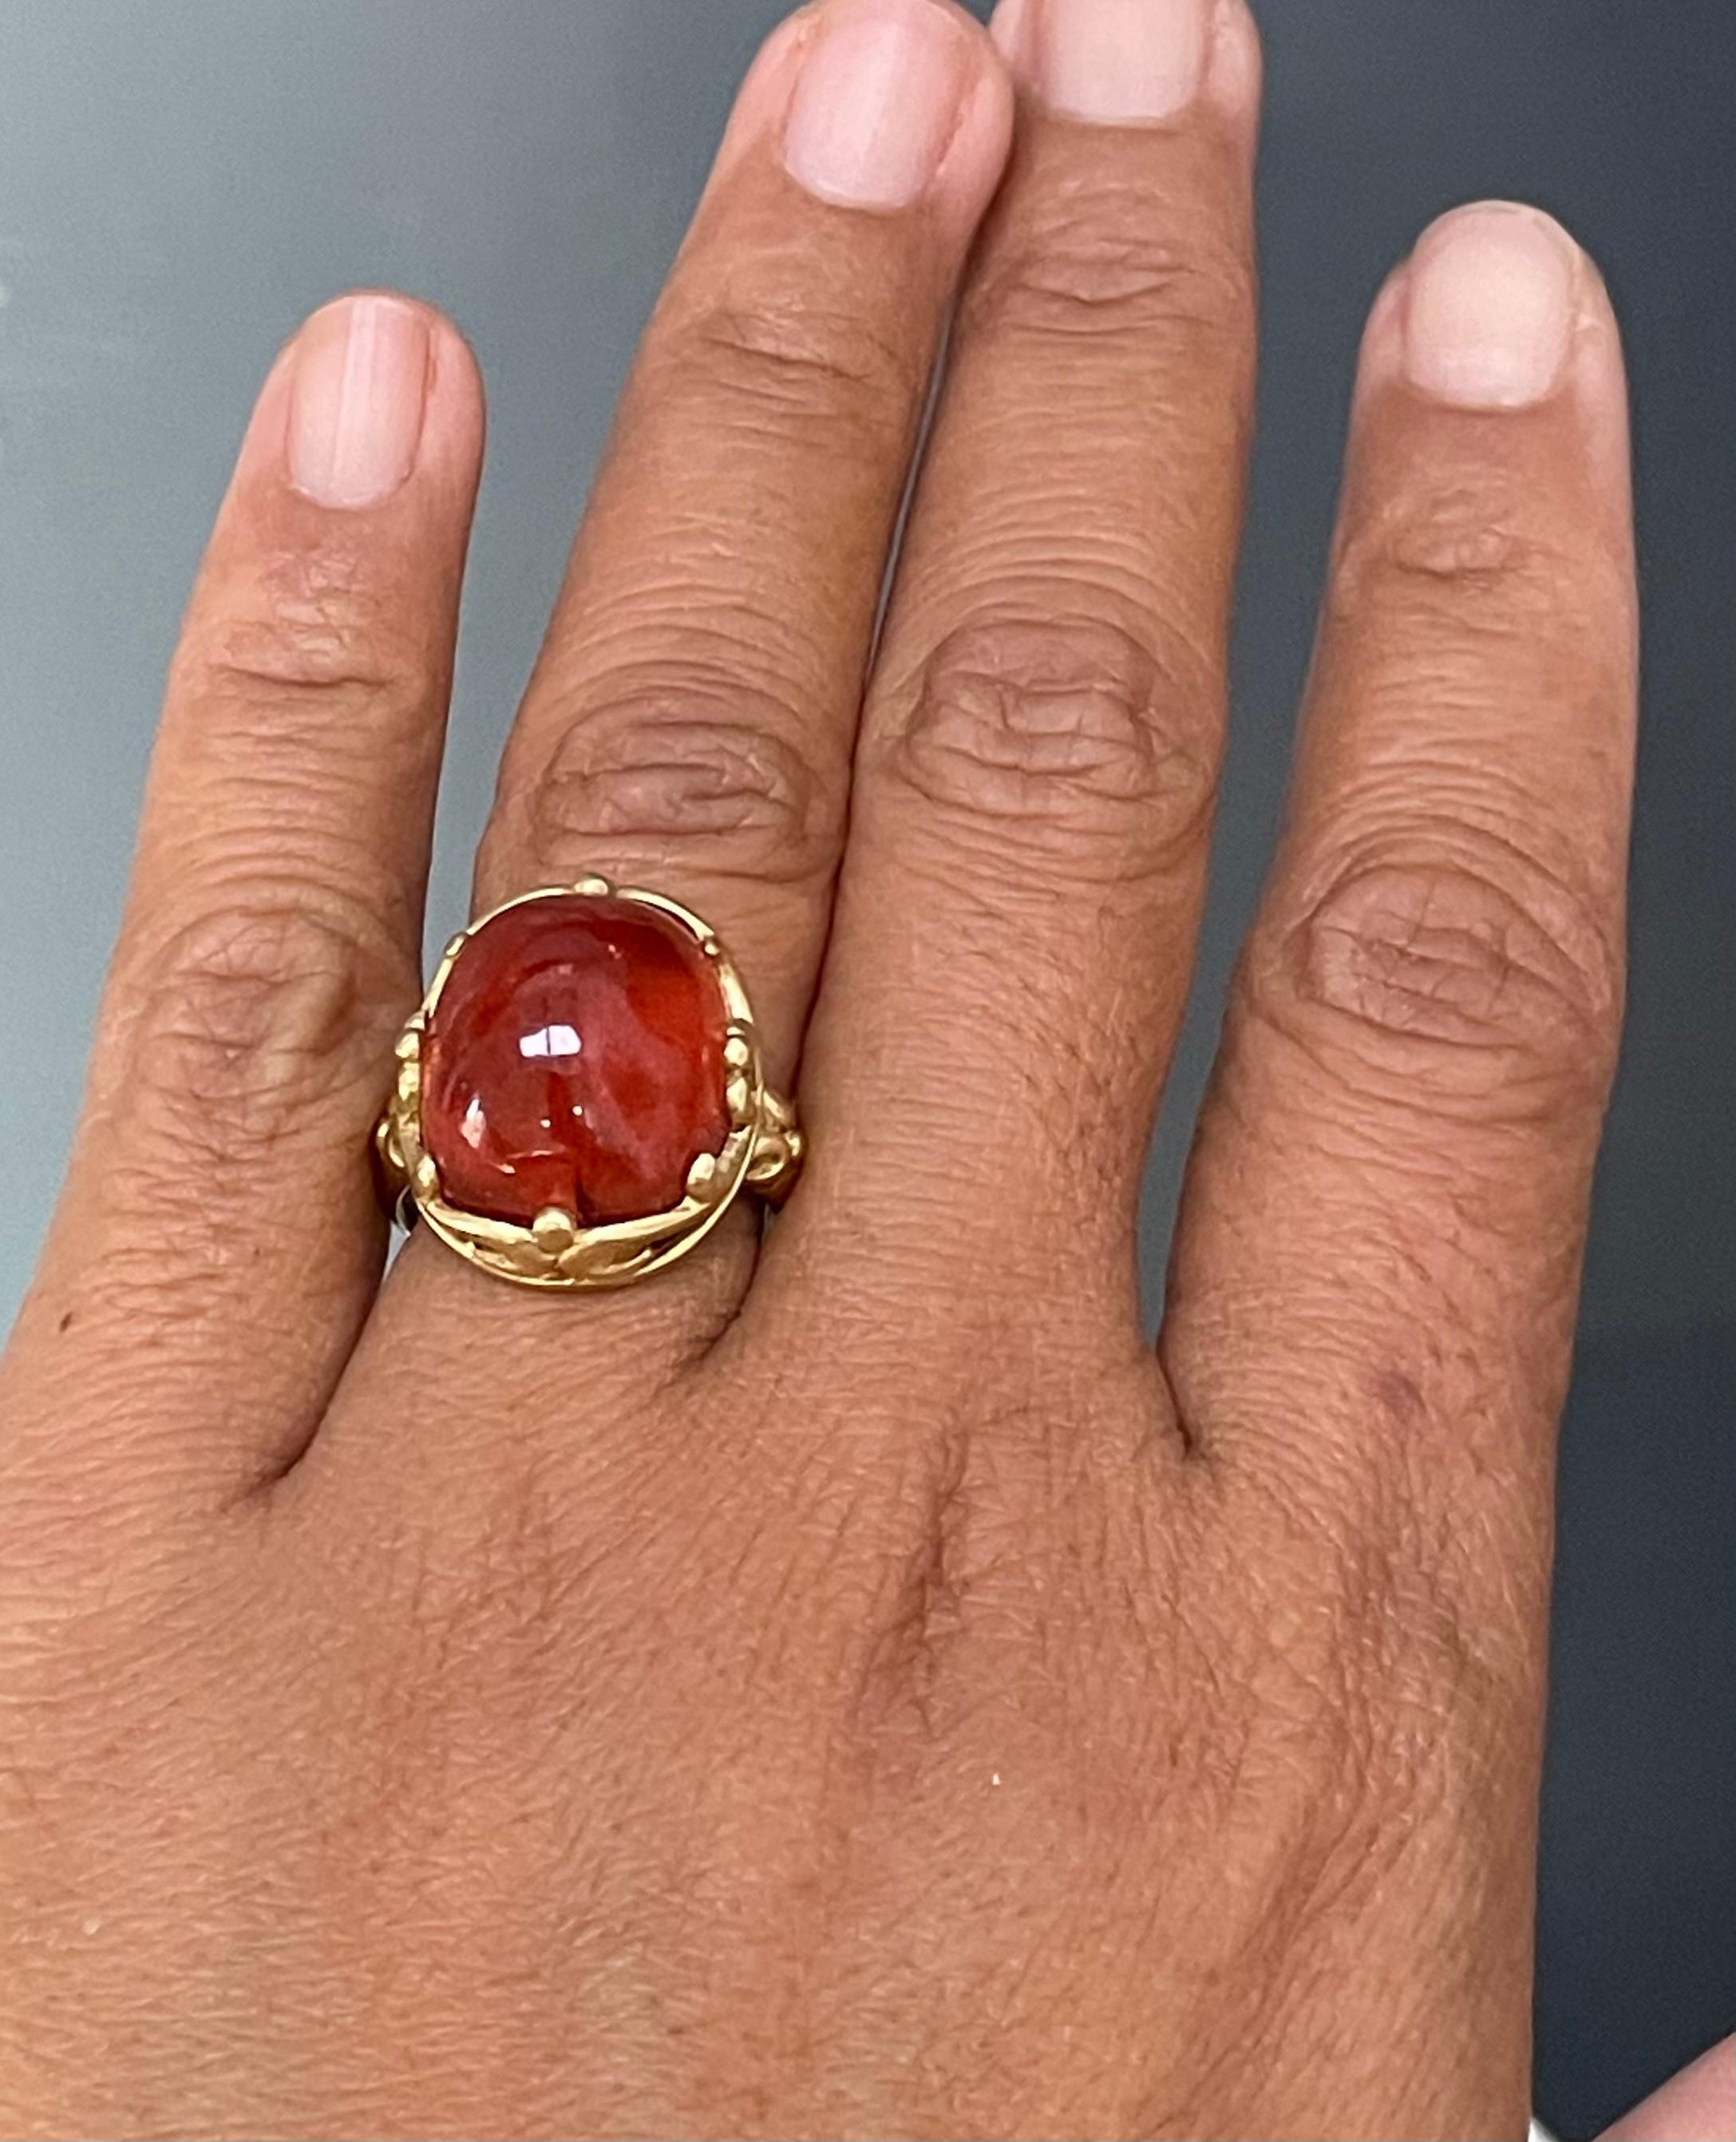 A delicious gumdrop of a 14 x 17 mm pink tourmaline cabochon is held in a Steven Battelle designed fluted and carved embrace. A stunner of a ring!  This is a really lively and magical stone, sure to please.  This ring is currently sized 7.5.  It is